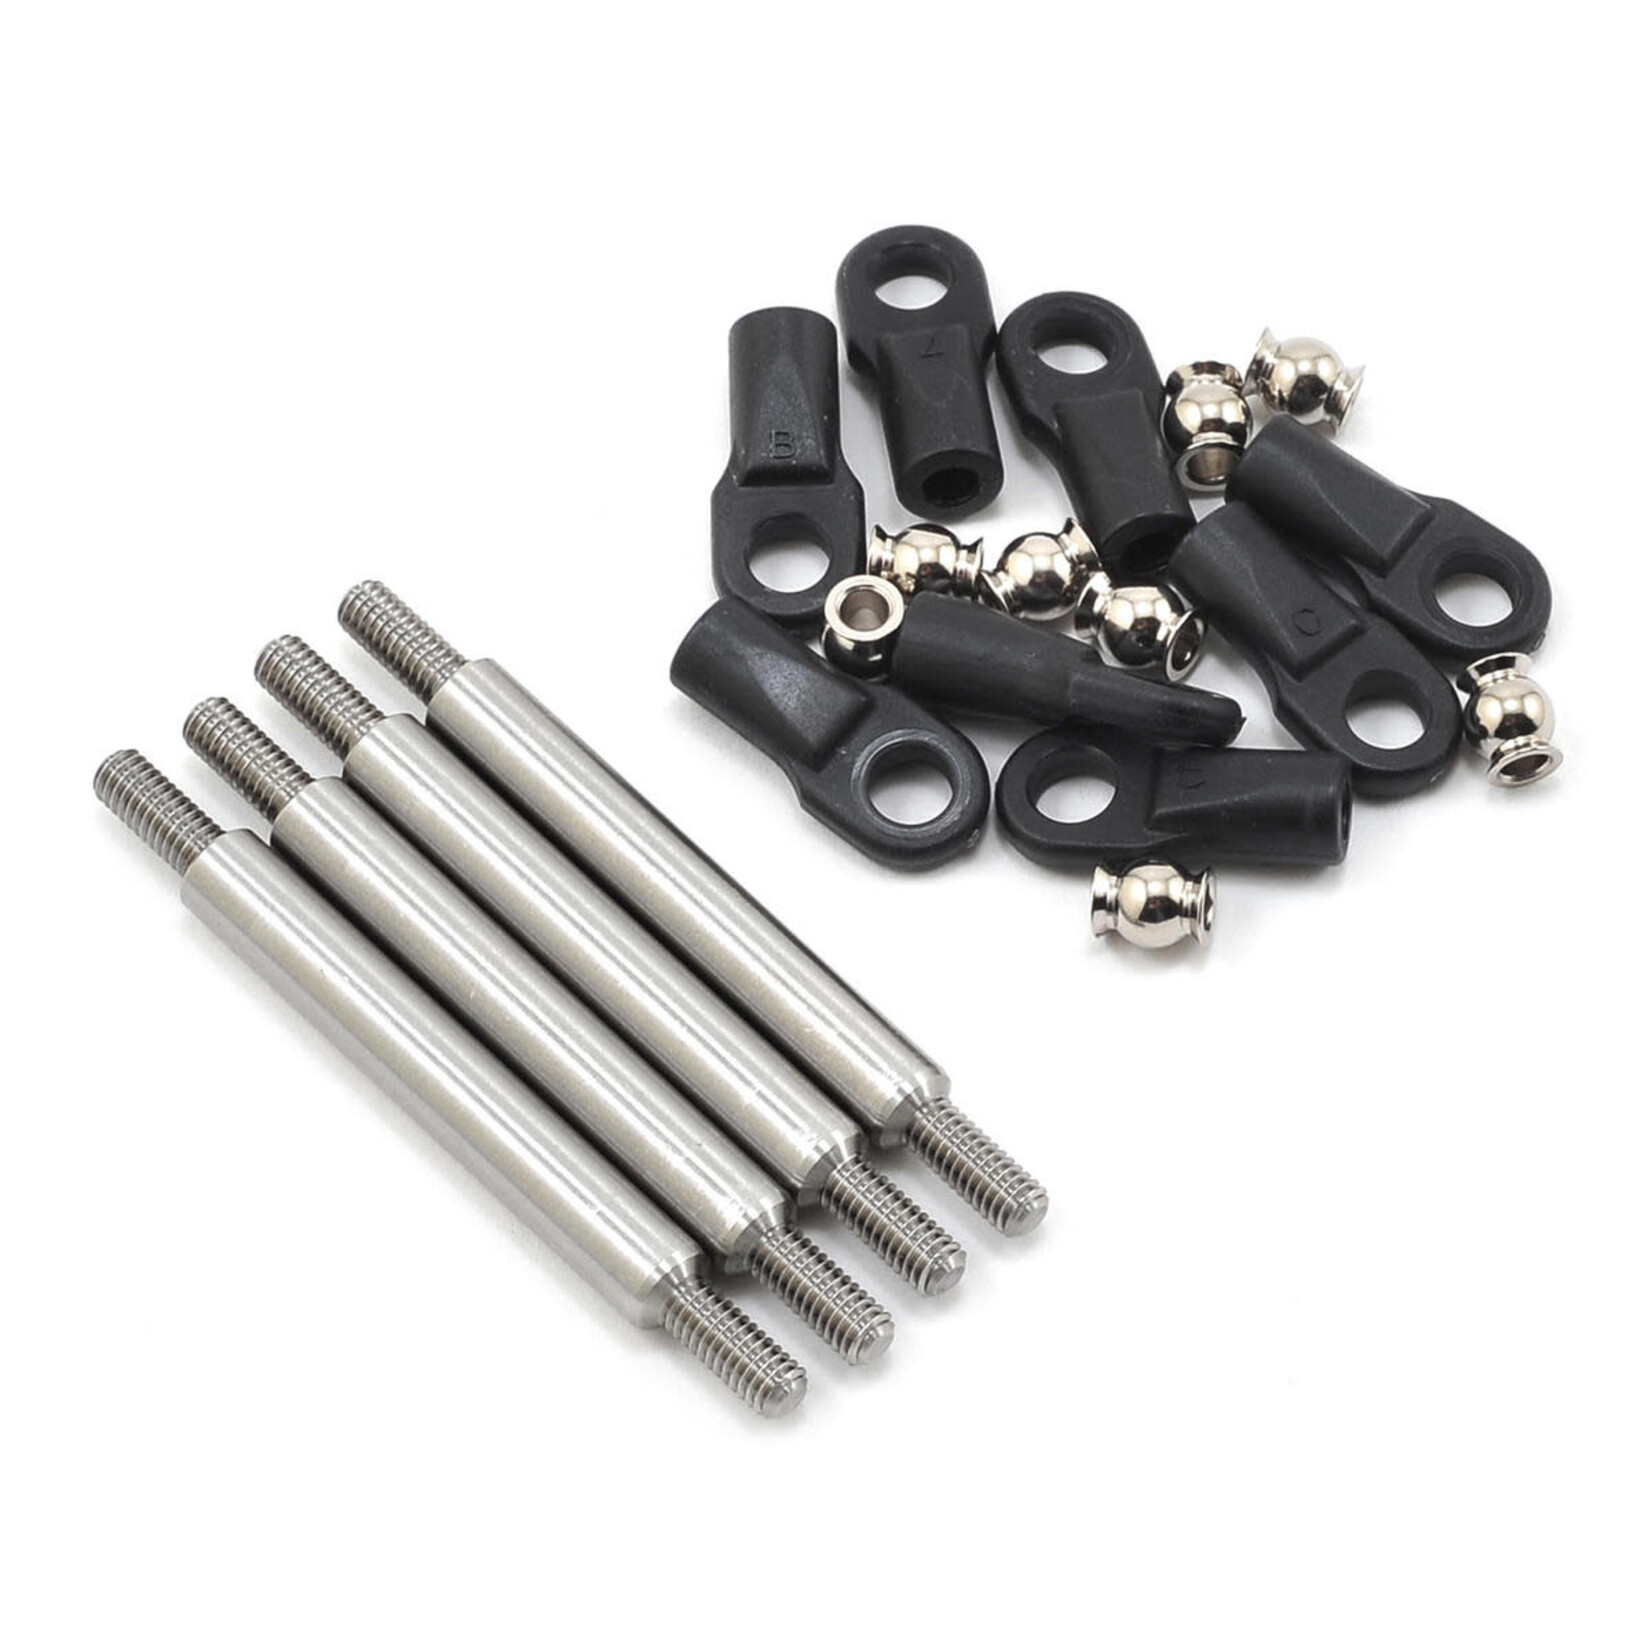 Incision Incision Yeti 1/4 Stainless Steel Front Link Set (4) #IRC00050